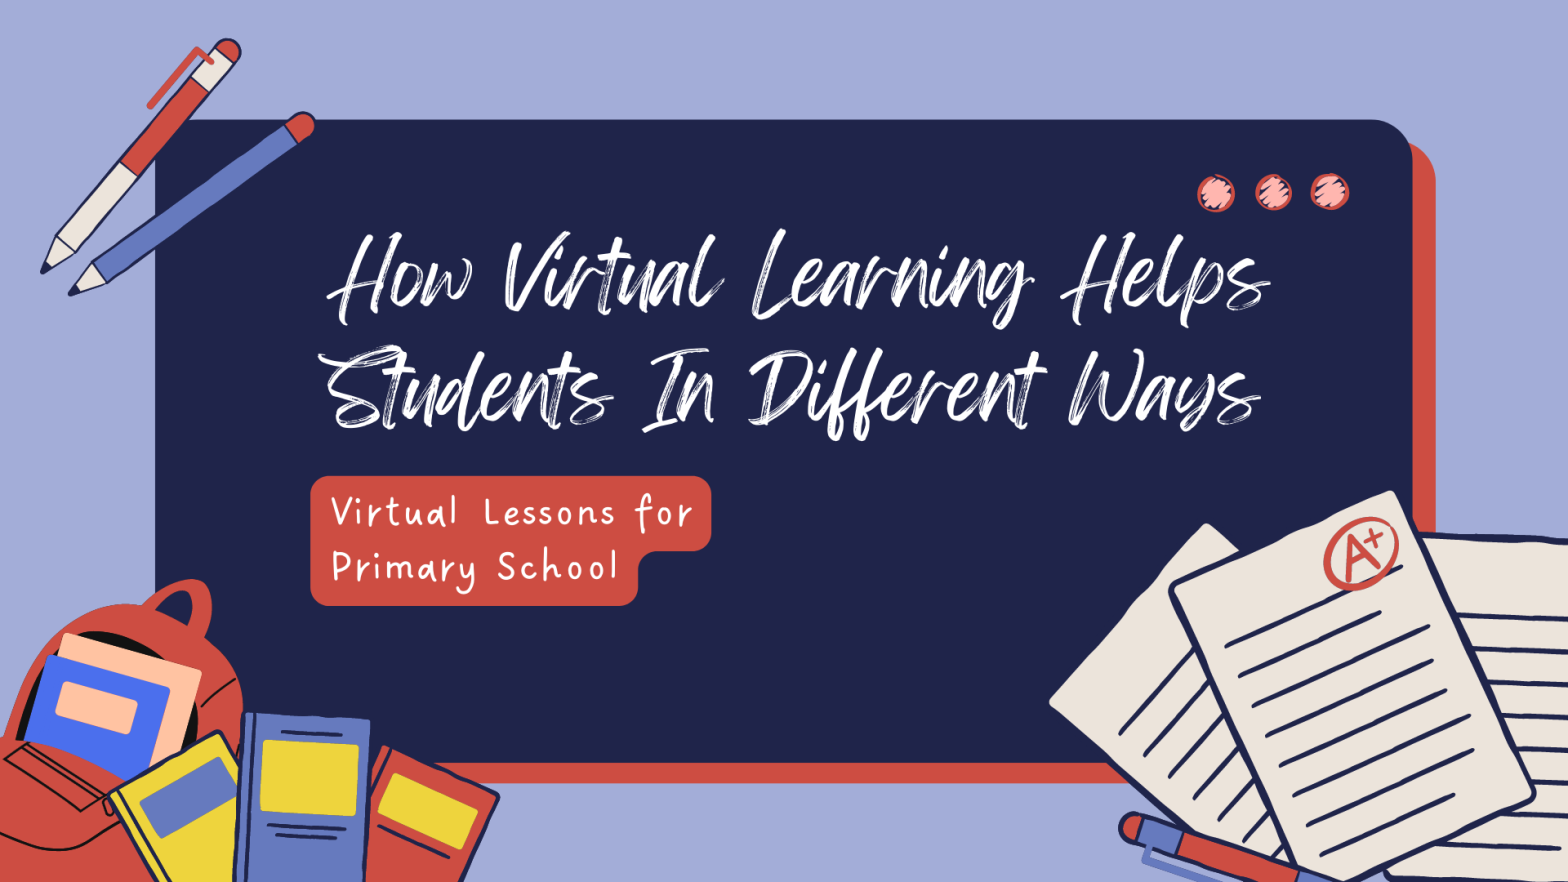 Virtual Lessons for Primary School